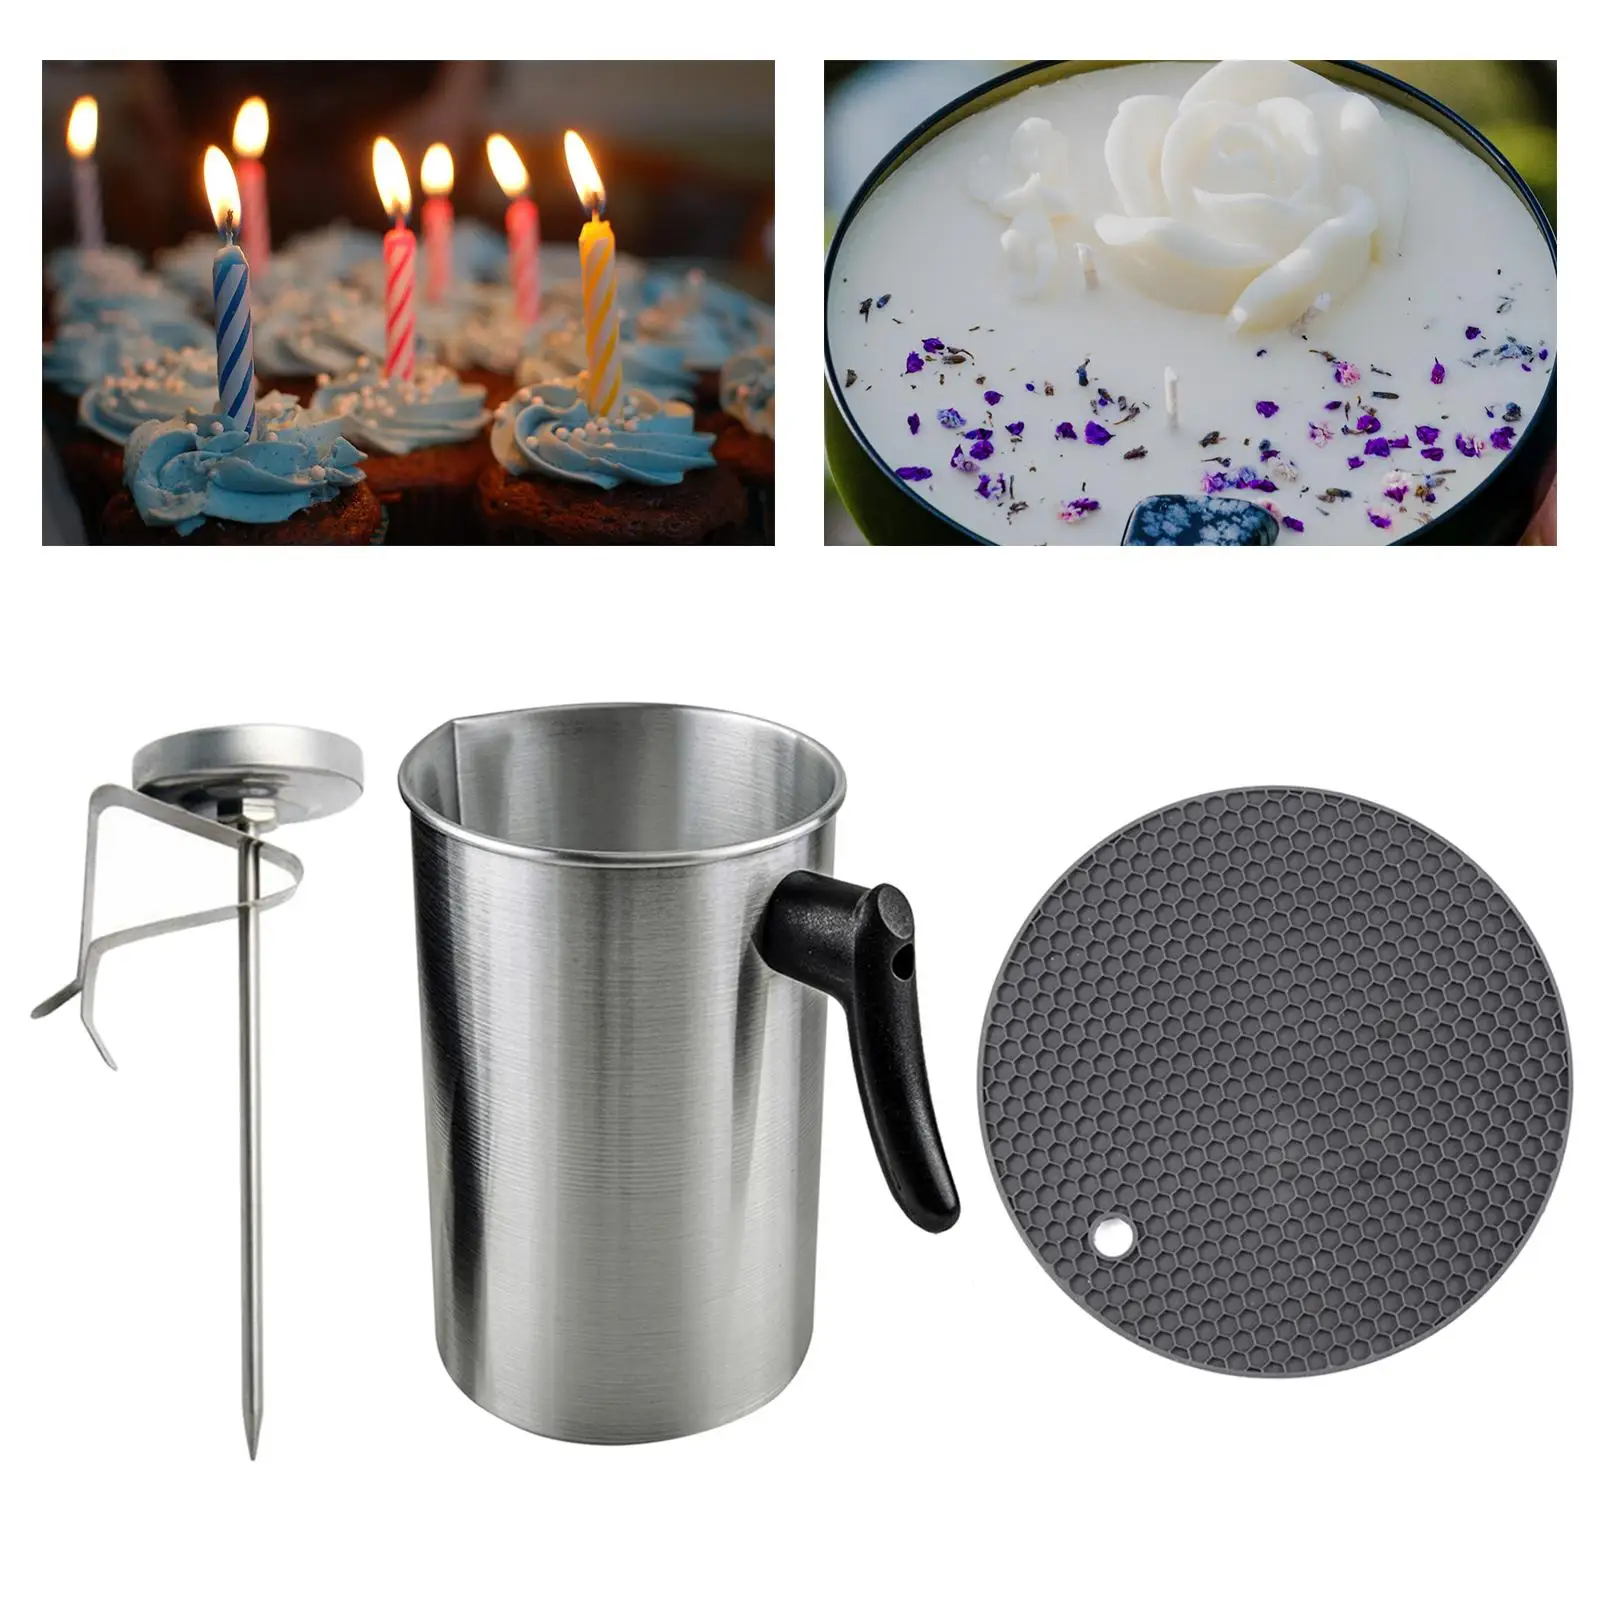 3L Capacity Candle Melting Pot Set with Thermometer Heat-Resistant Handle